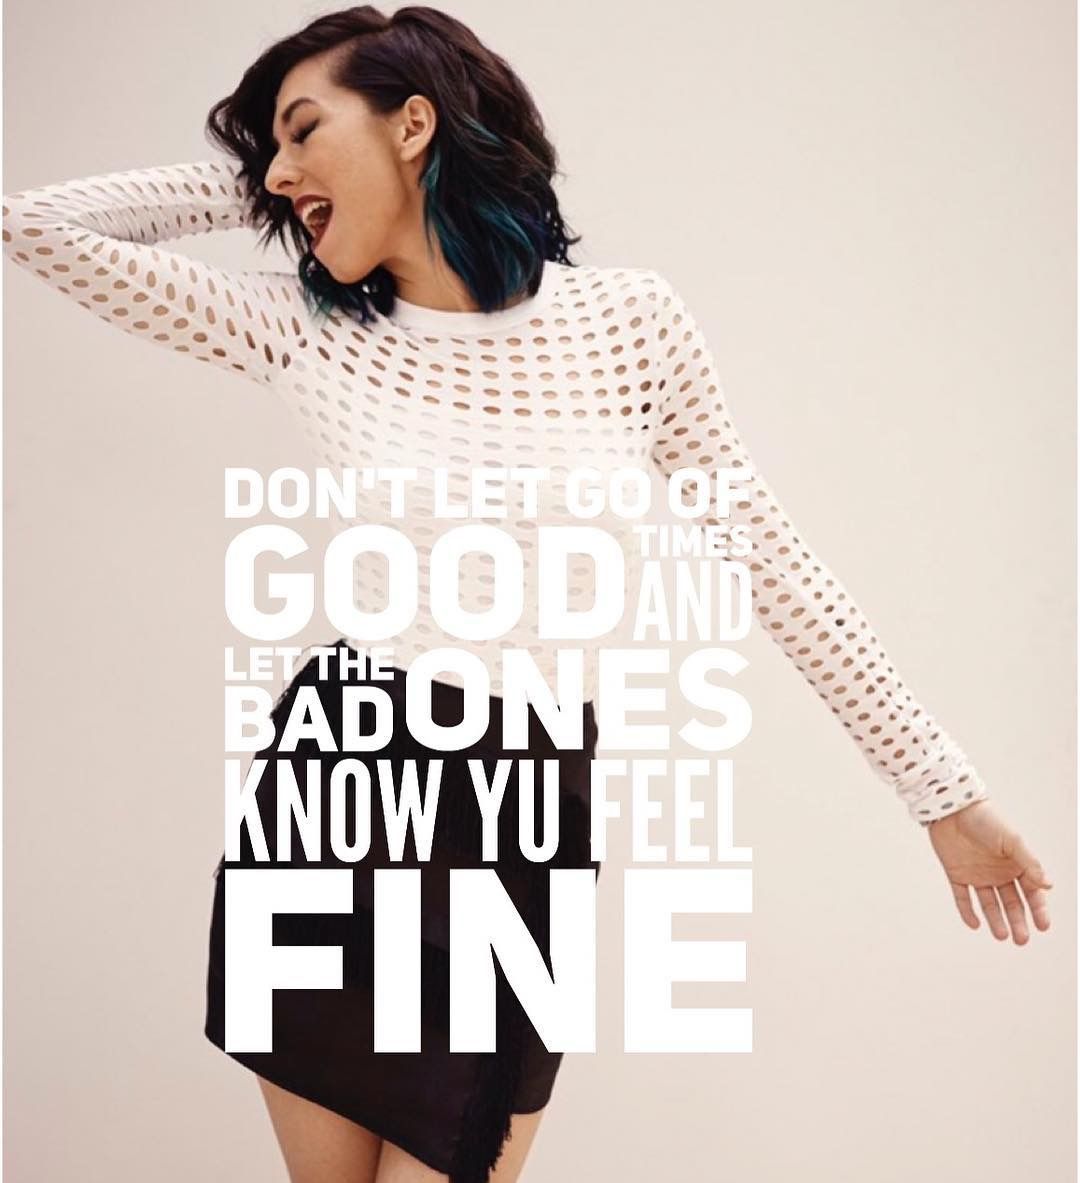 Christina Grimmie Ipod Wallpaper, Christina Grimmie - Girl , HD Wallpaper & Backgrounds